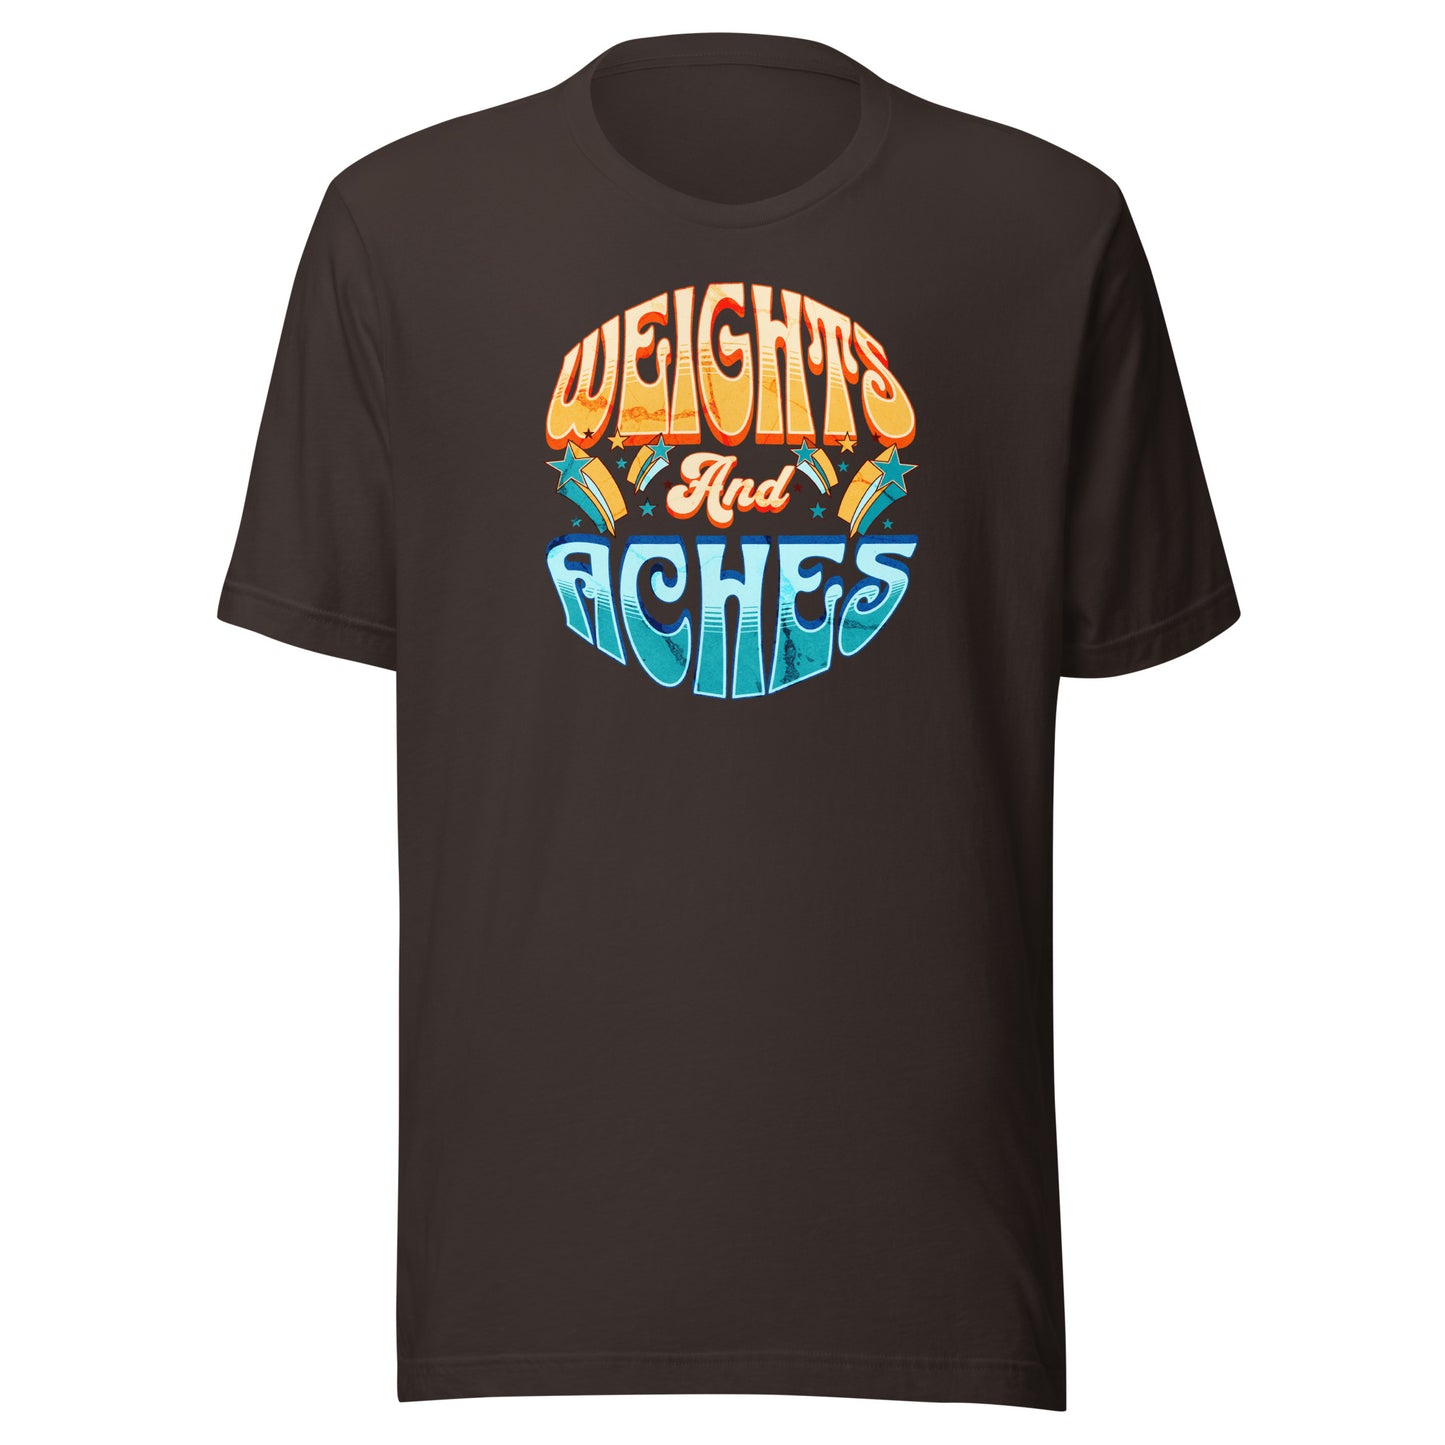 Weights and Aches Retro Unisex t-shirt